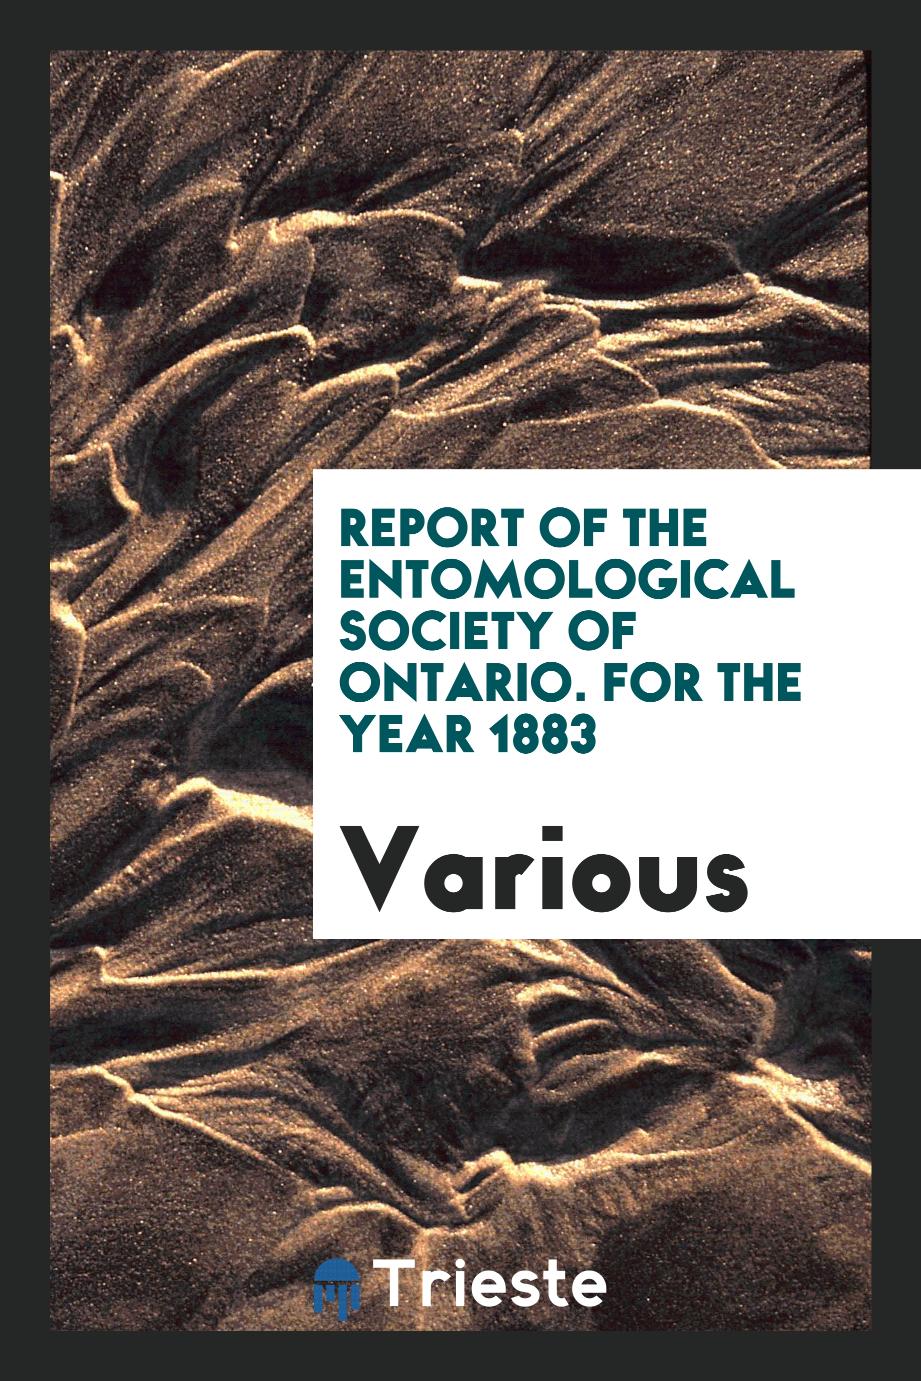 Report of the Entomological Society of Ontario. For the year 1883